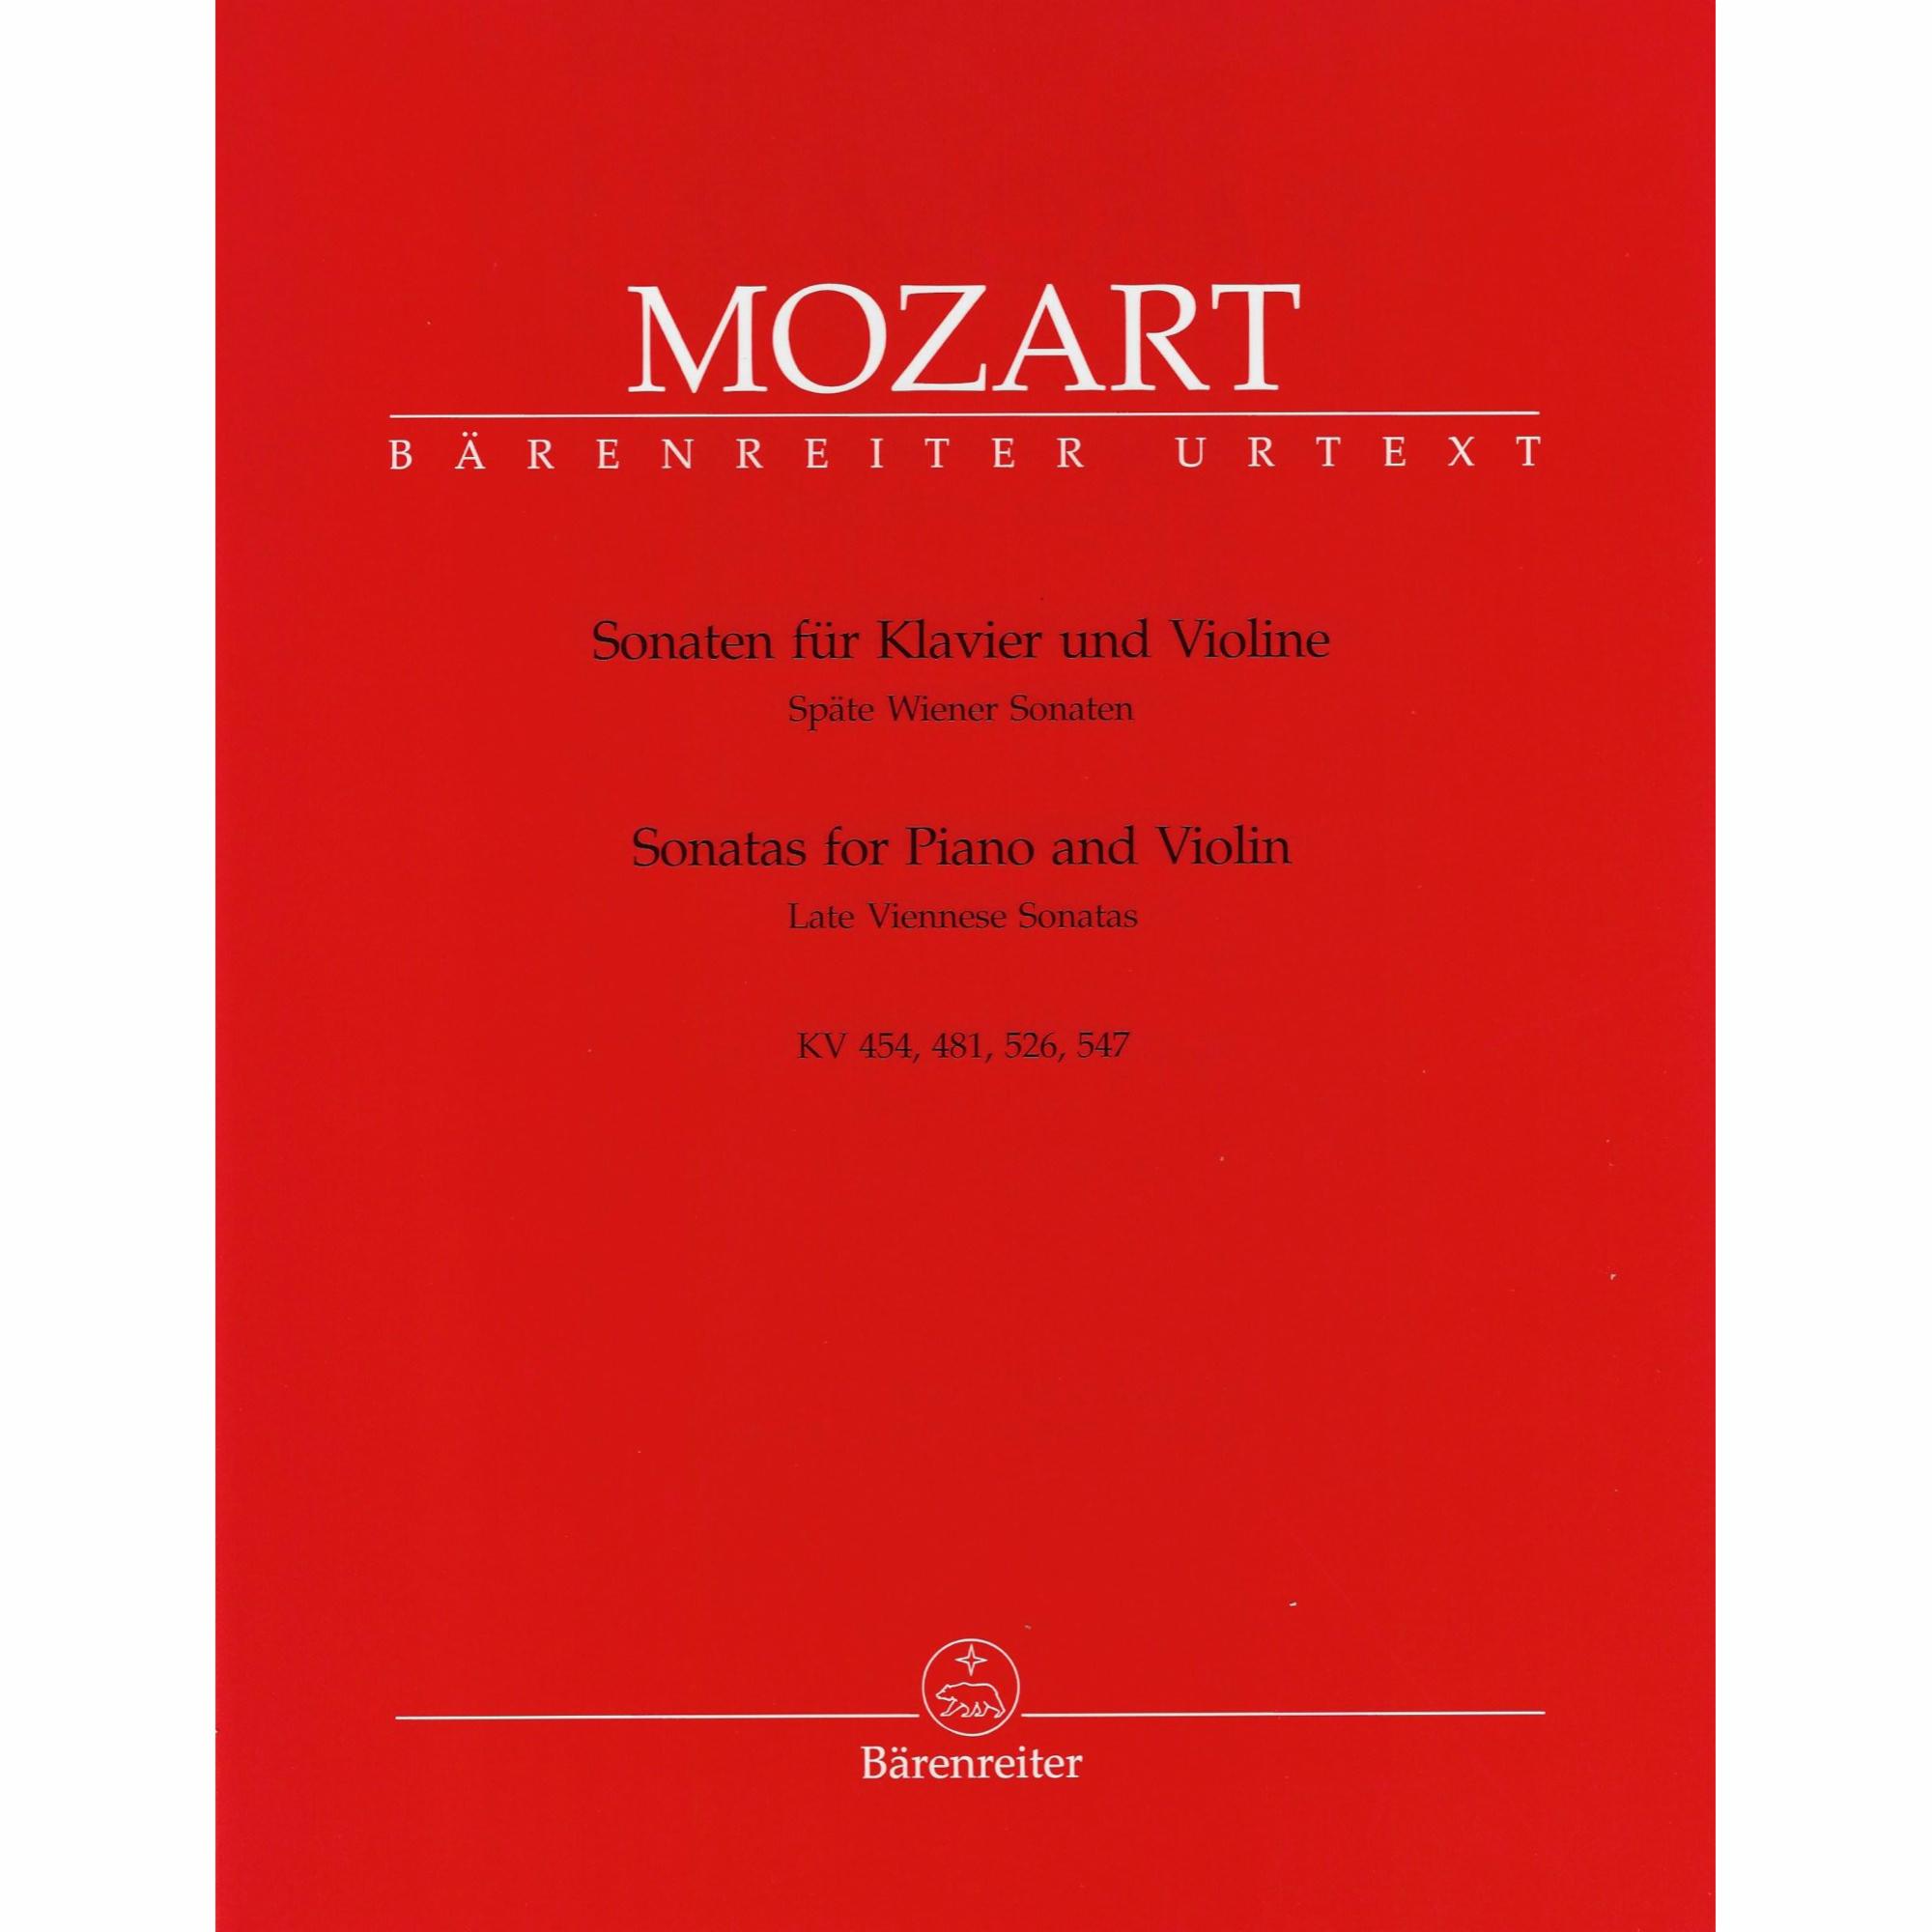 Mozart -- Late Viennese Sonatas for Violin and Piano